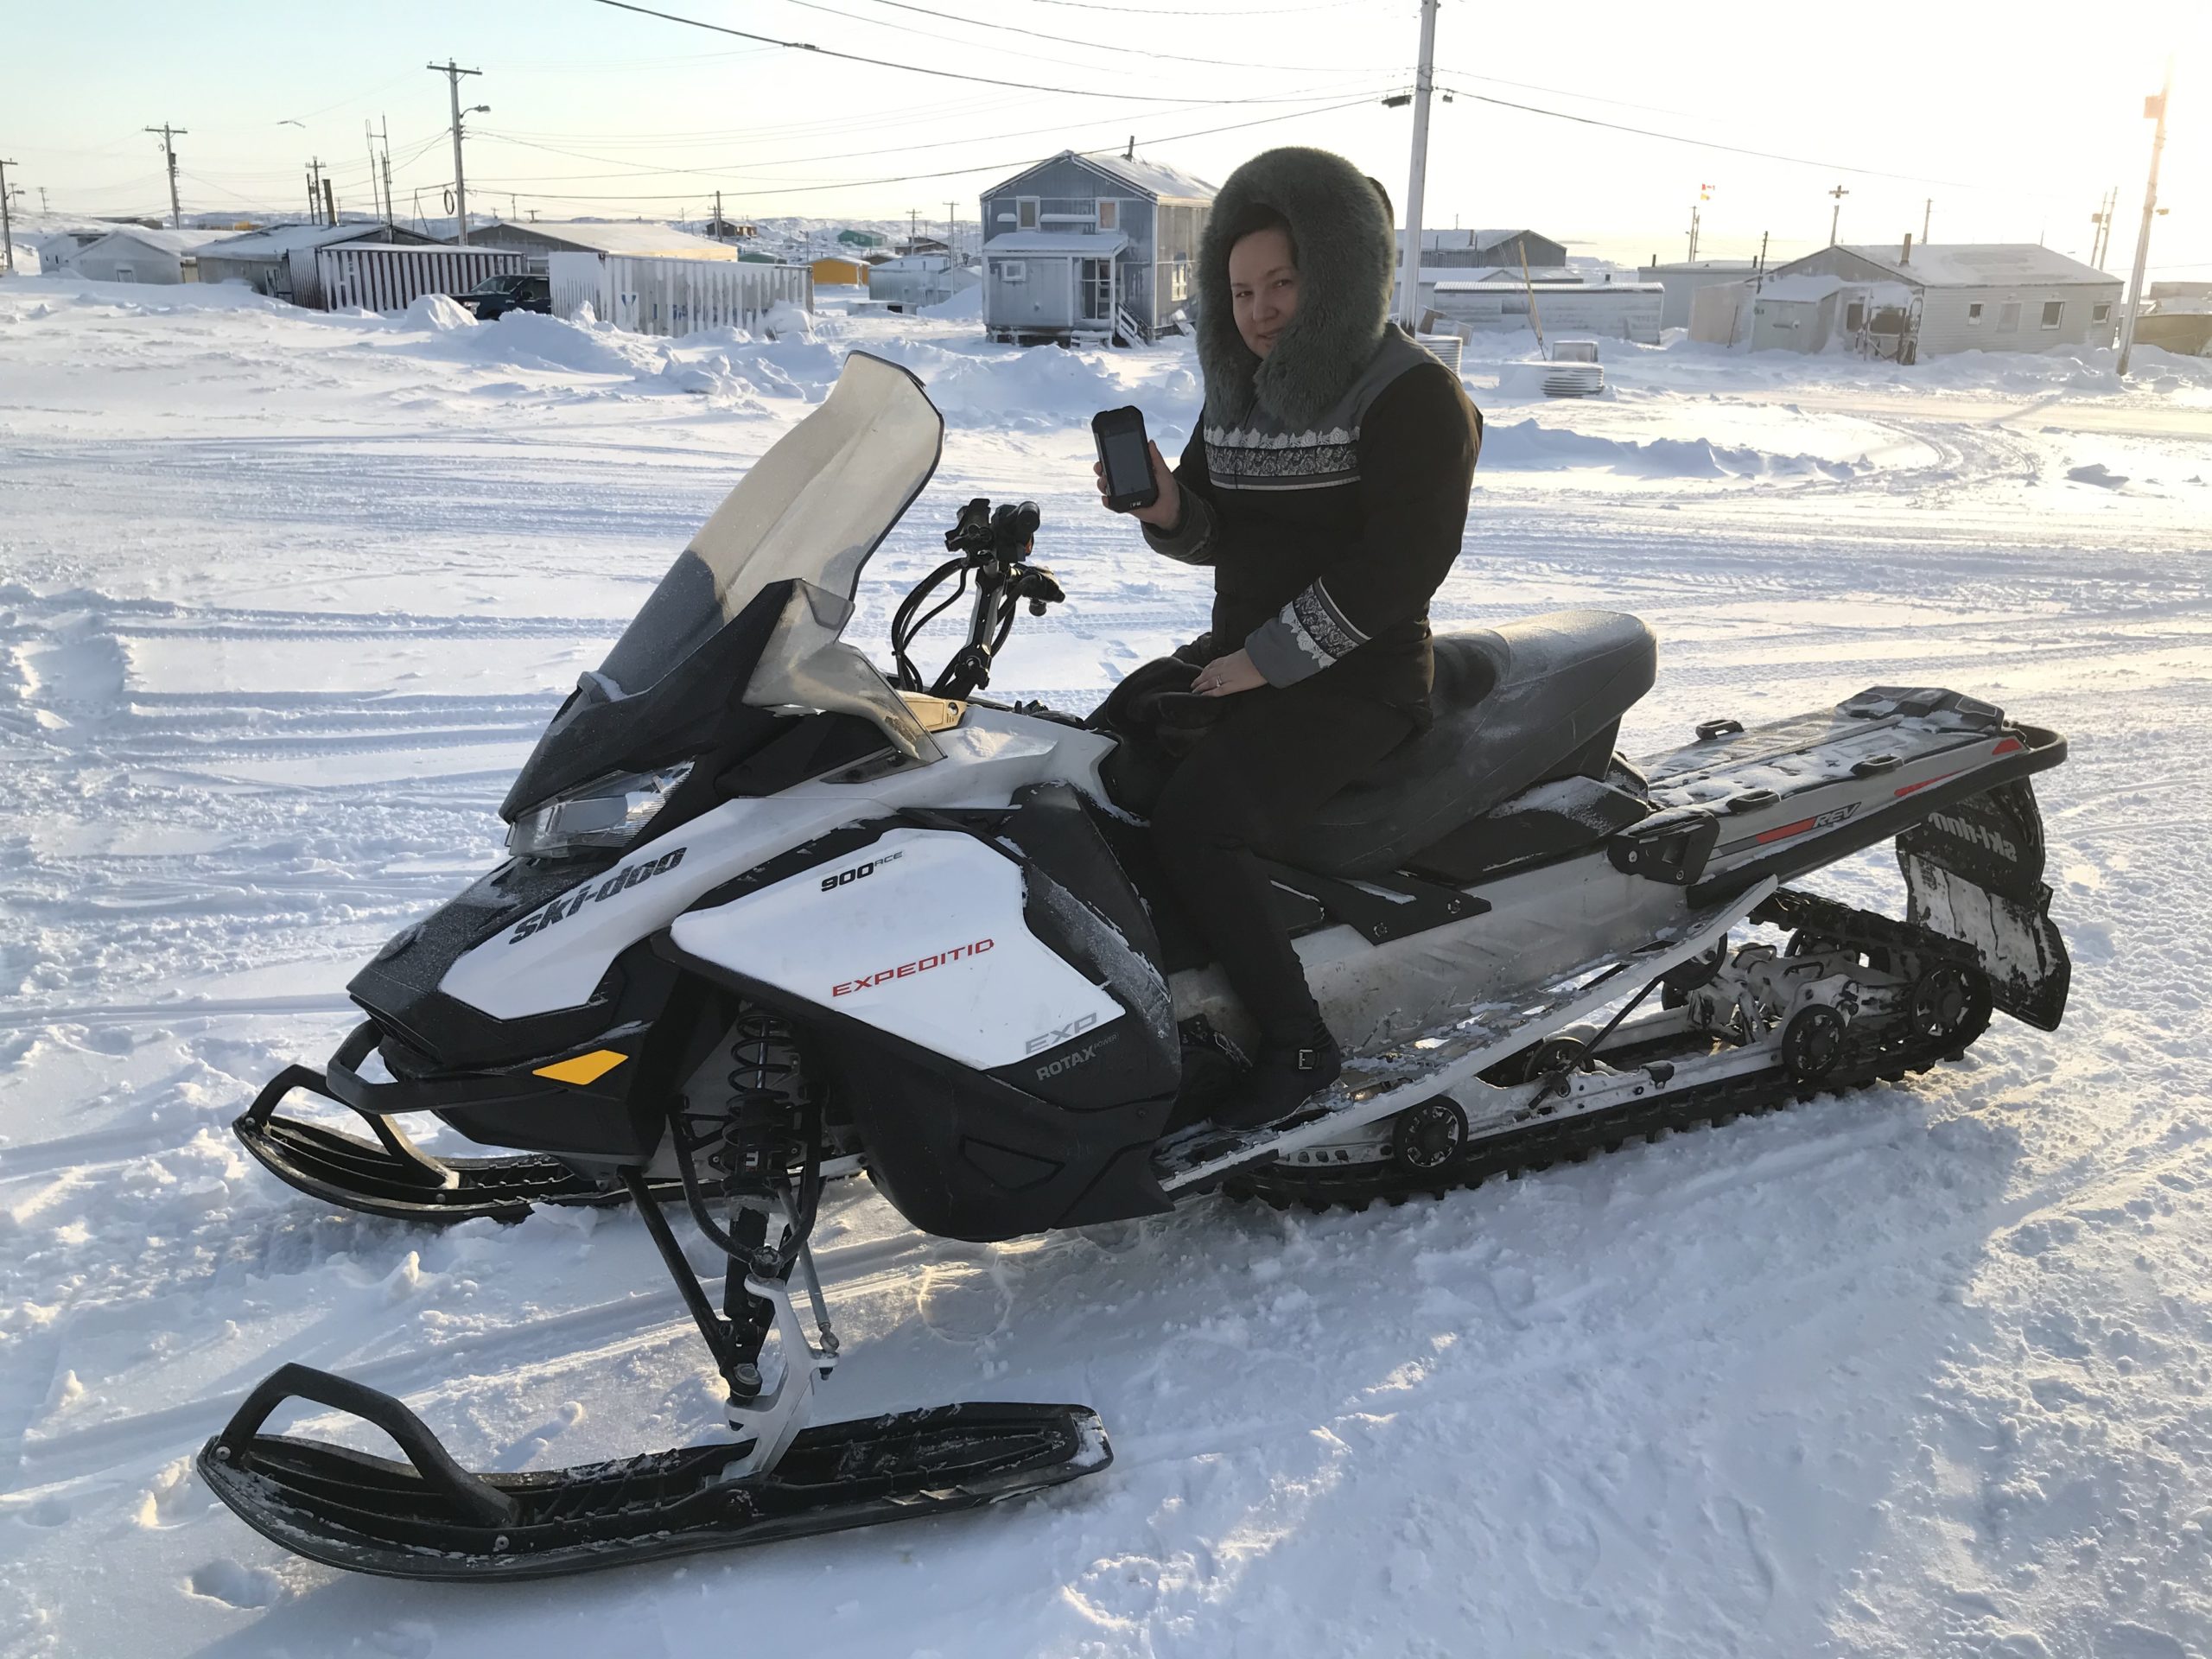 Manager of the polar bear patrol in Whale Cove shows data capturing device while seated on a snowmobile